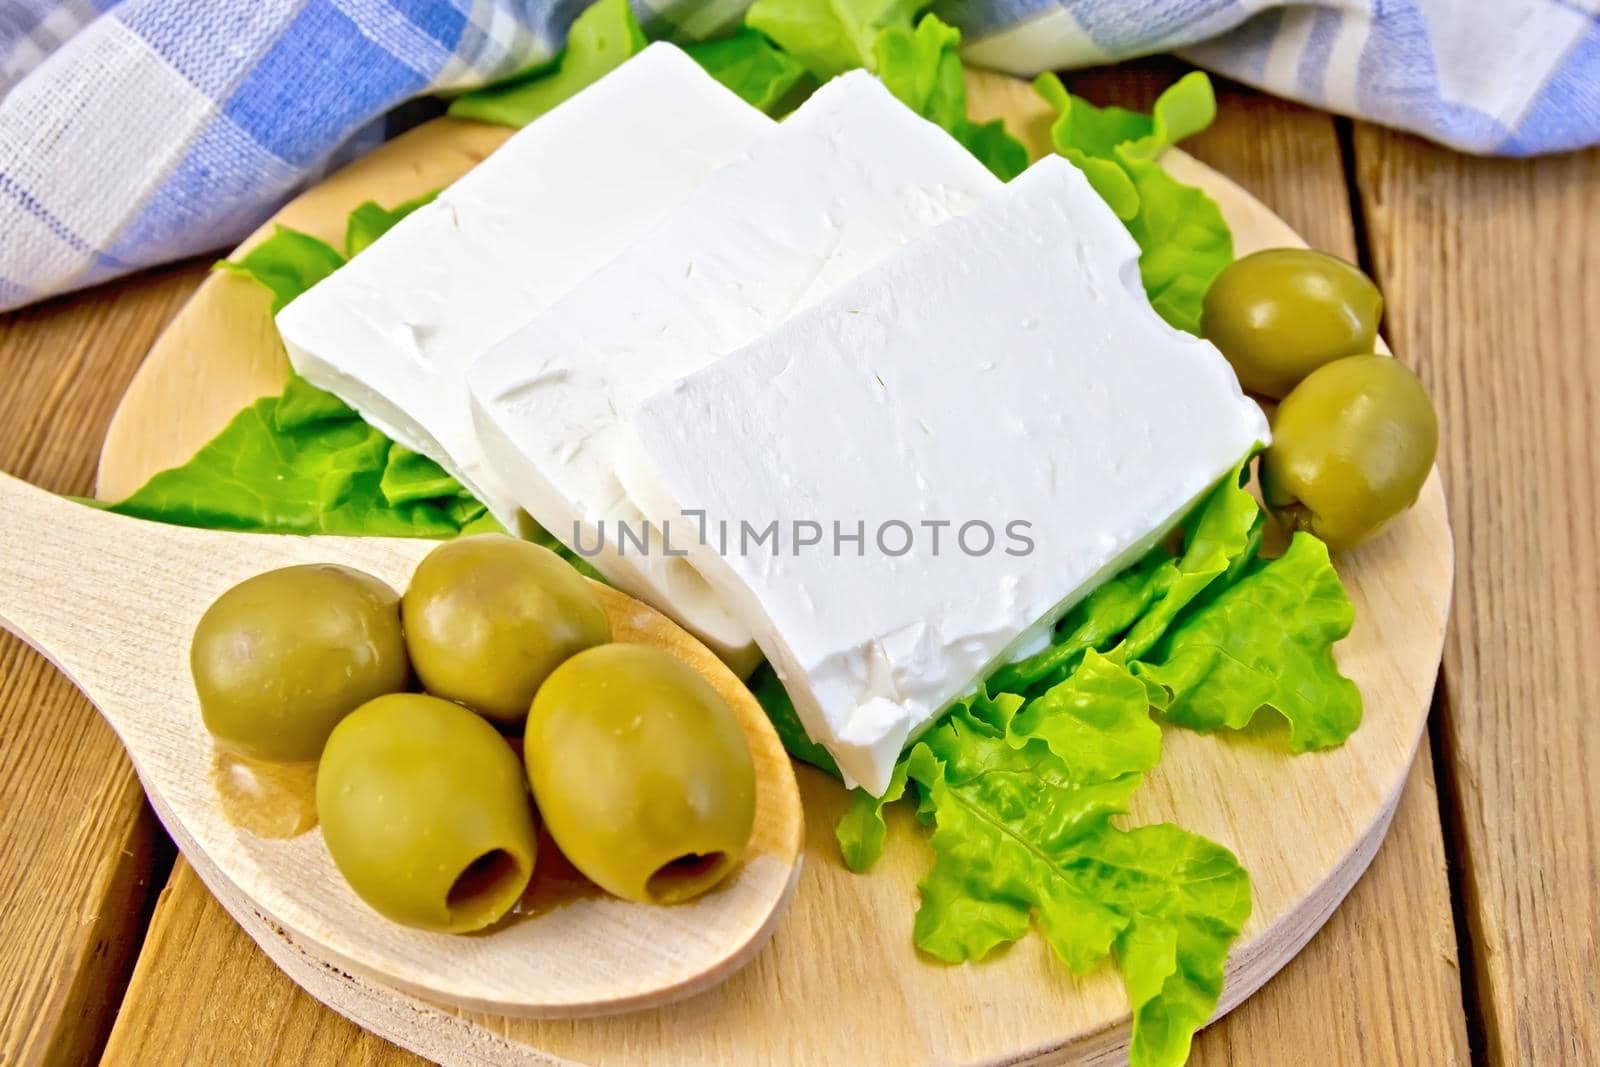 White brine cheese, lettuce, olives, spoon with olives, blue plaid napkin on a wooden boards background